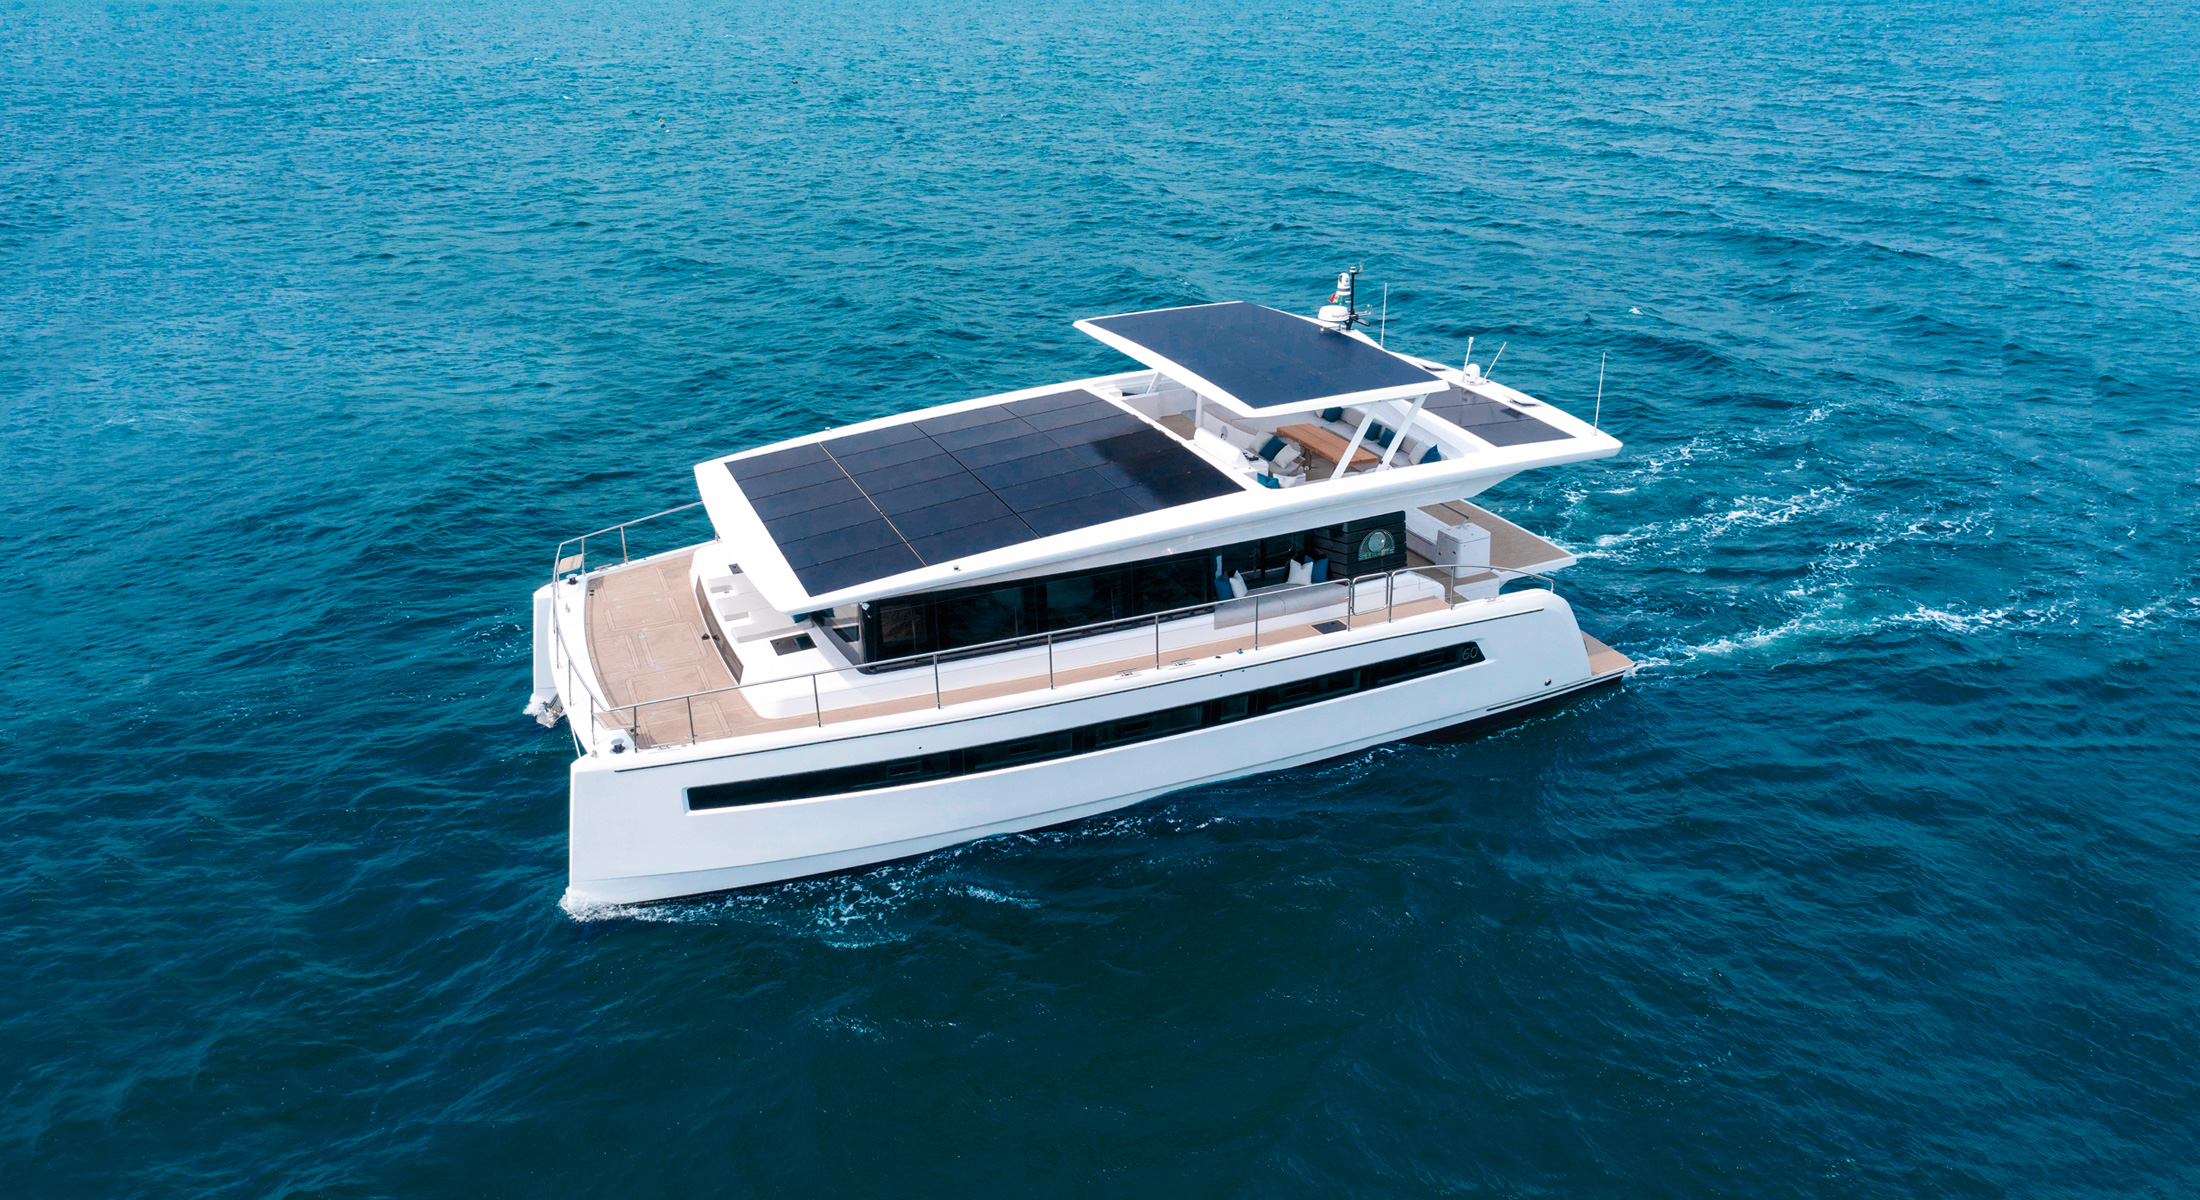 Electric catamaran with solar panels on the roof